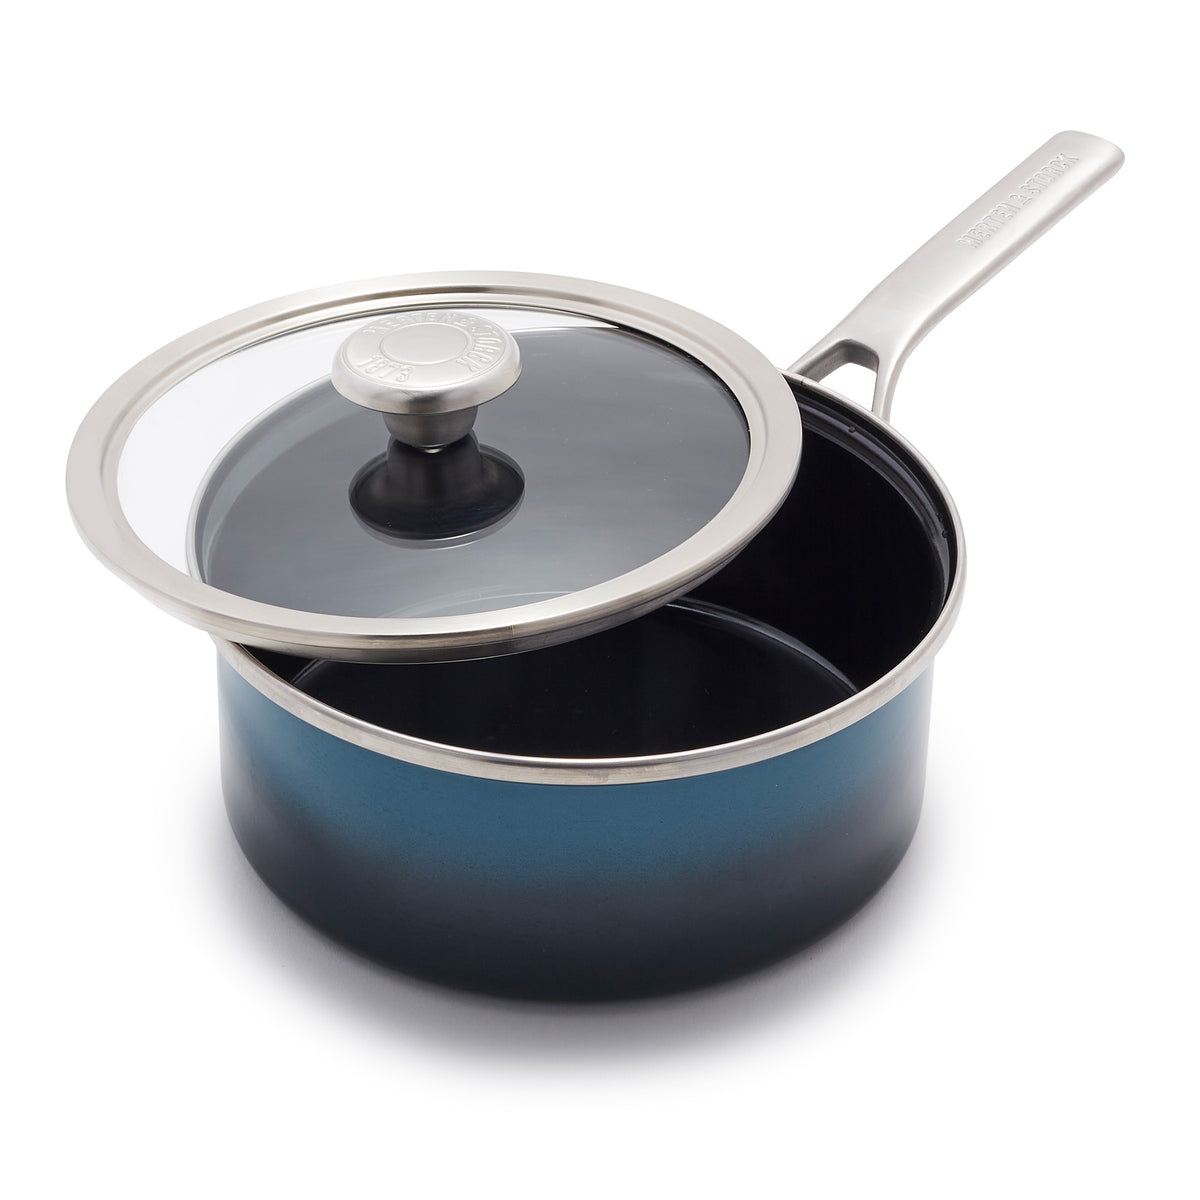 Merten & Storck European Crafted Enameled Iron, Round 7QT Dutch Oven  Casserole with Lid, Aegean Teal